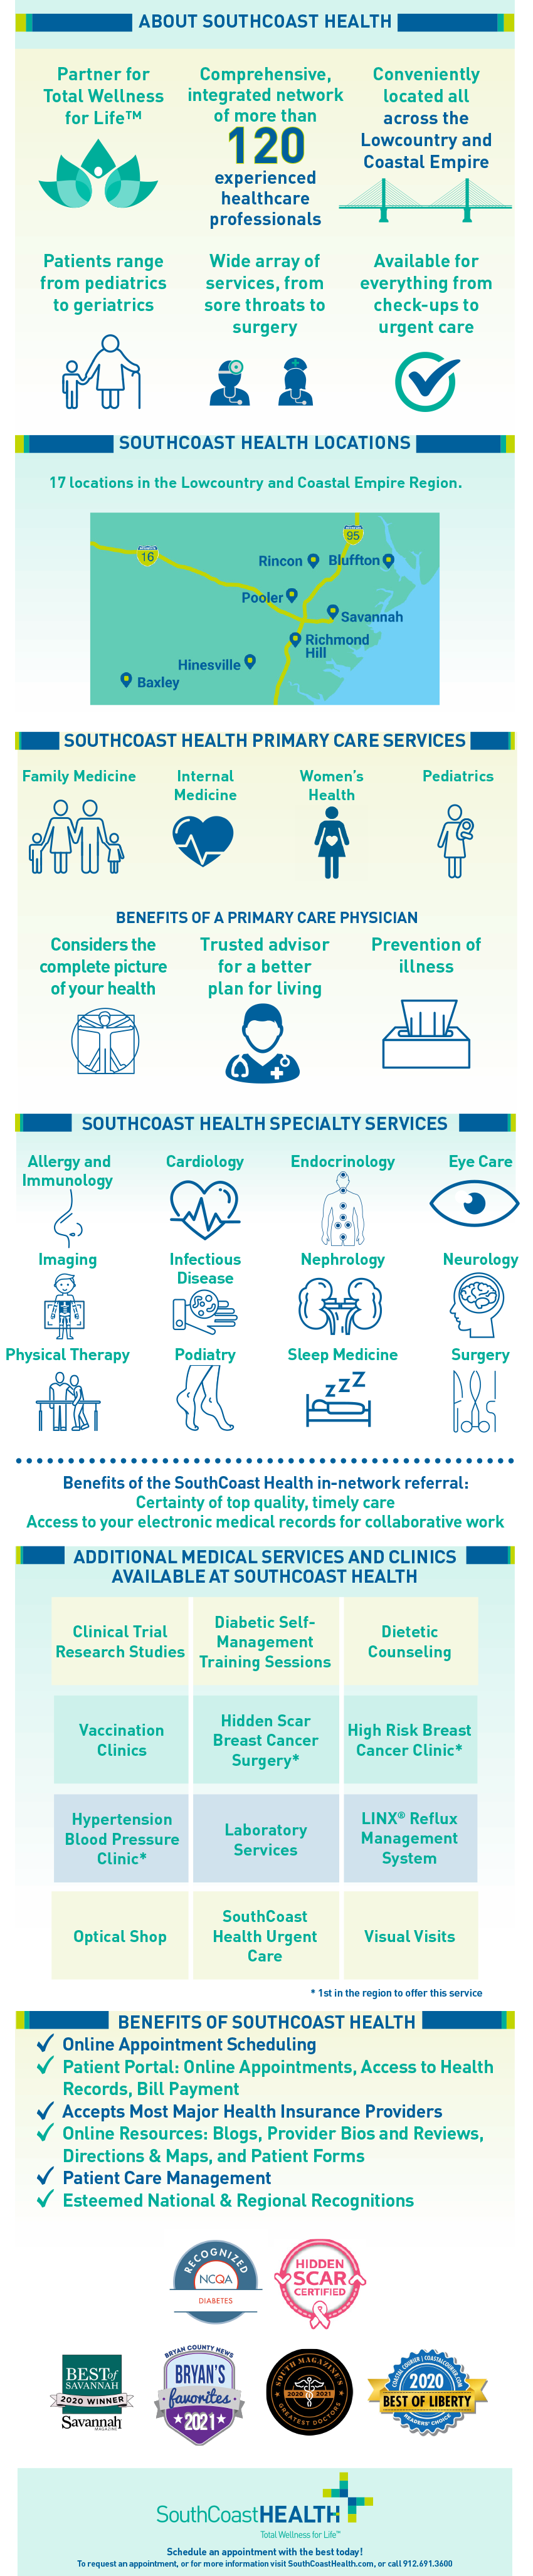 About SouthCoast Health - infographic